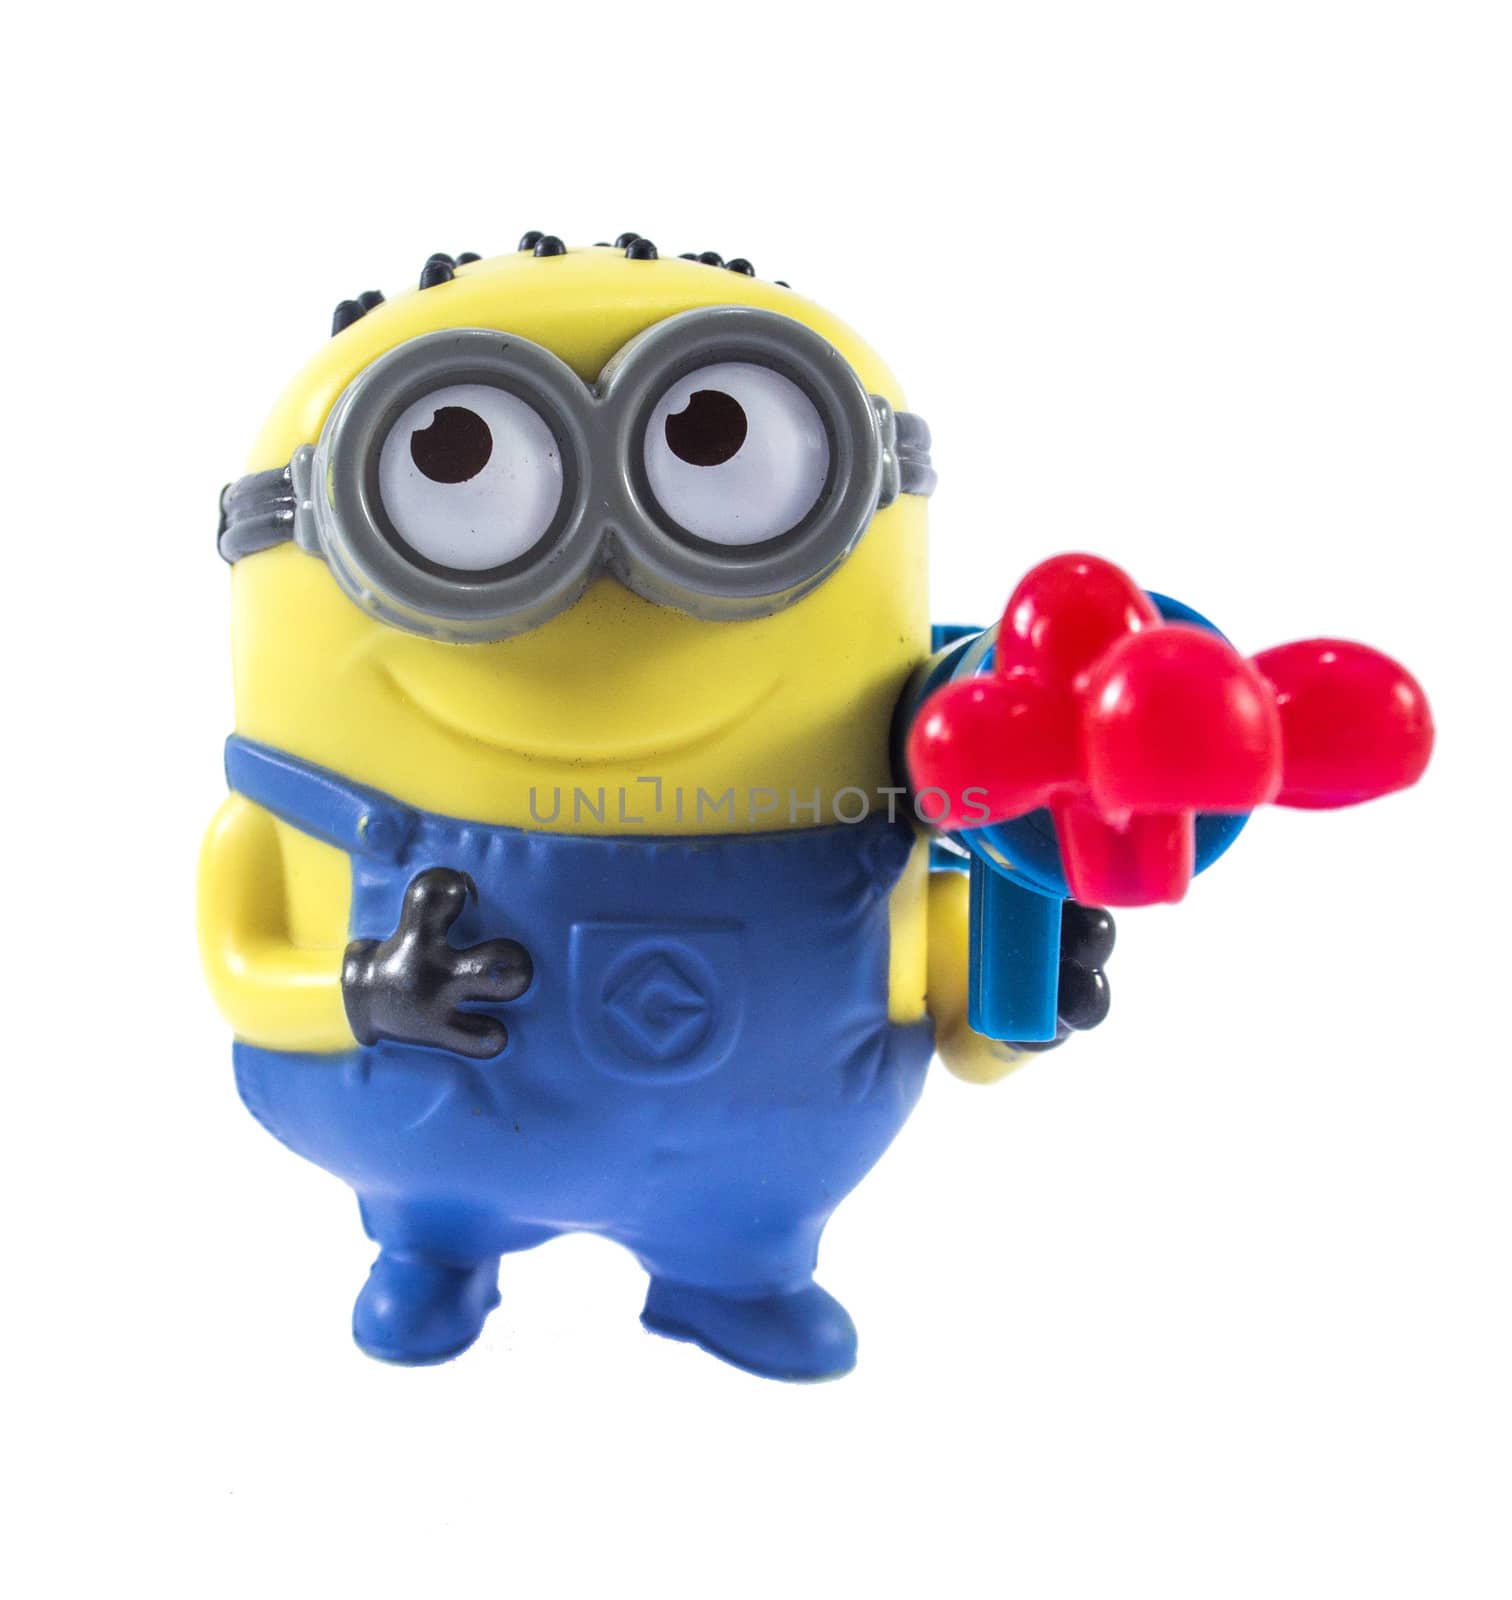 Amman, Jordan - November 1, 2014: Minion Stuart Blaster toy figure. There are plastic toy sold as part of the McDonald's Happy meals.